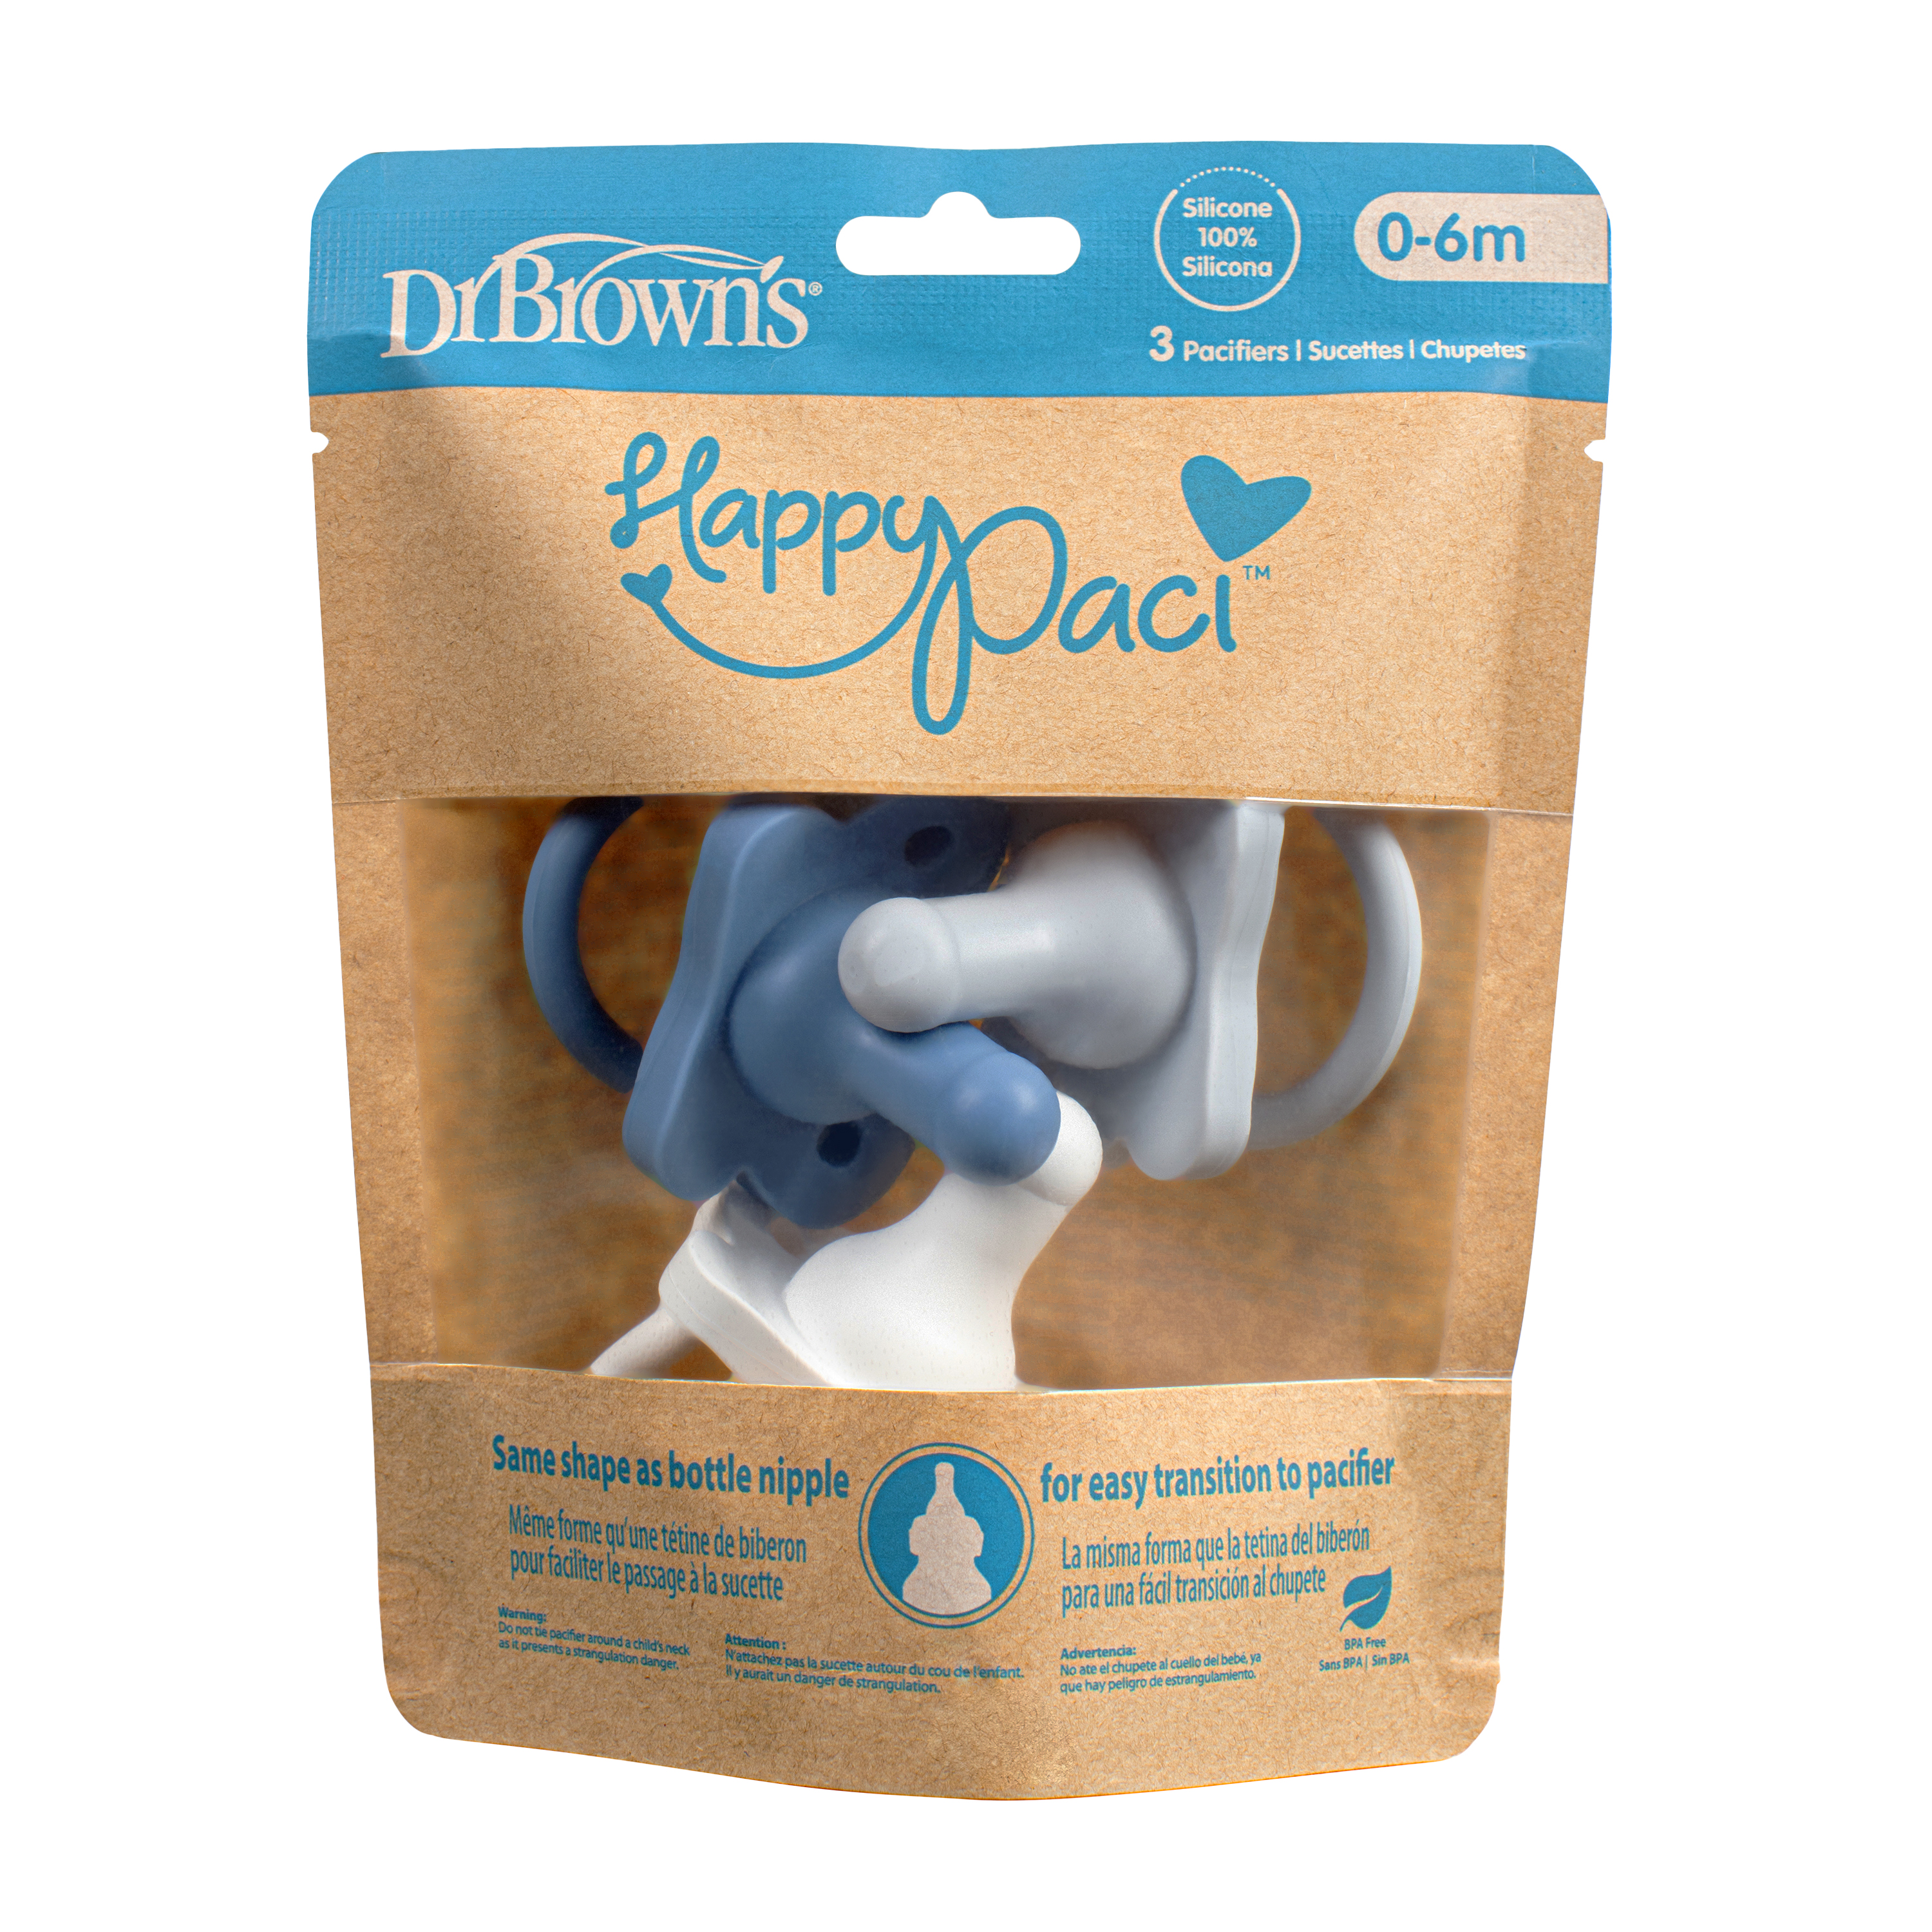 Dr. Brown's HappyPaci 100% Silicone Baby Pacifier, Contoured One-Piece Design, White/Blue/Light Blue, 0-6m, BPA-Free, 3-Pack - image 3 of 18